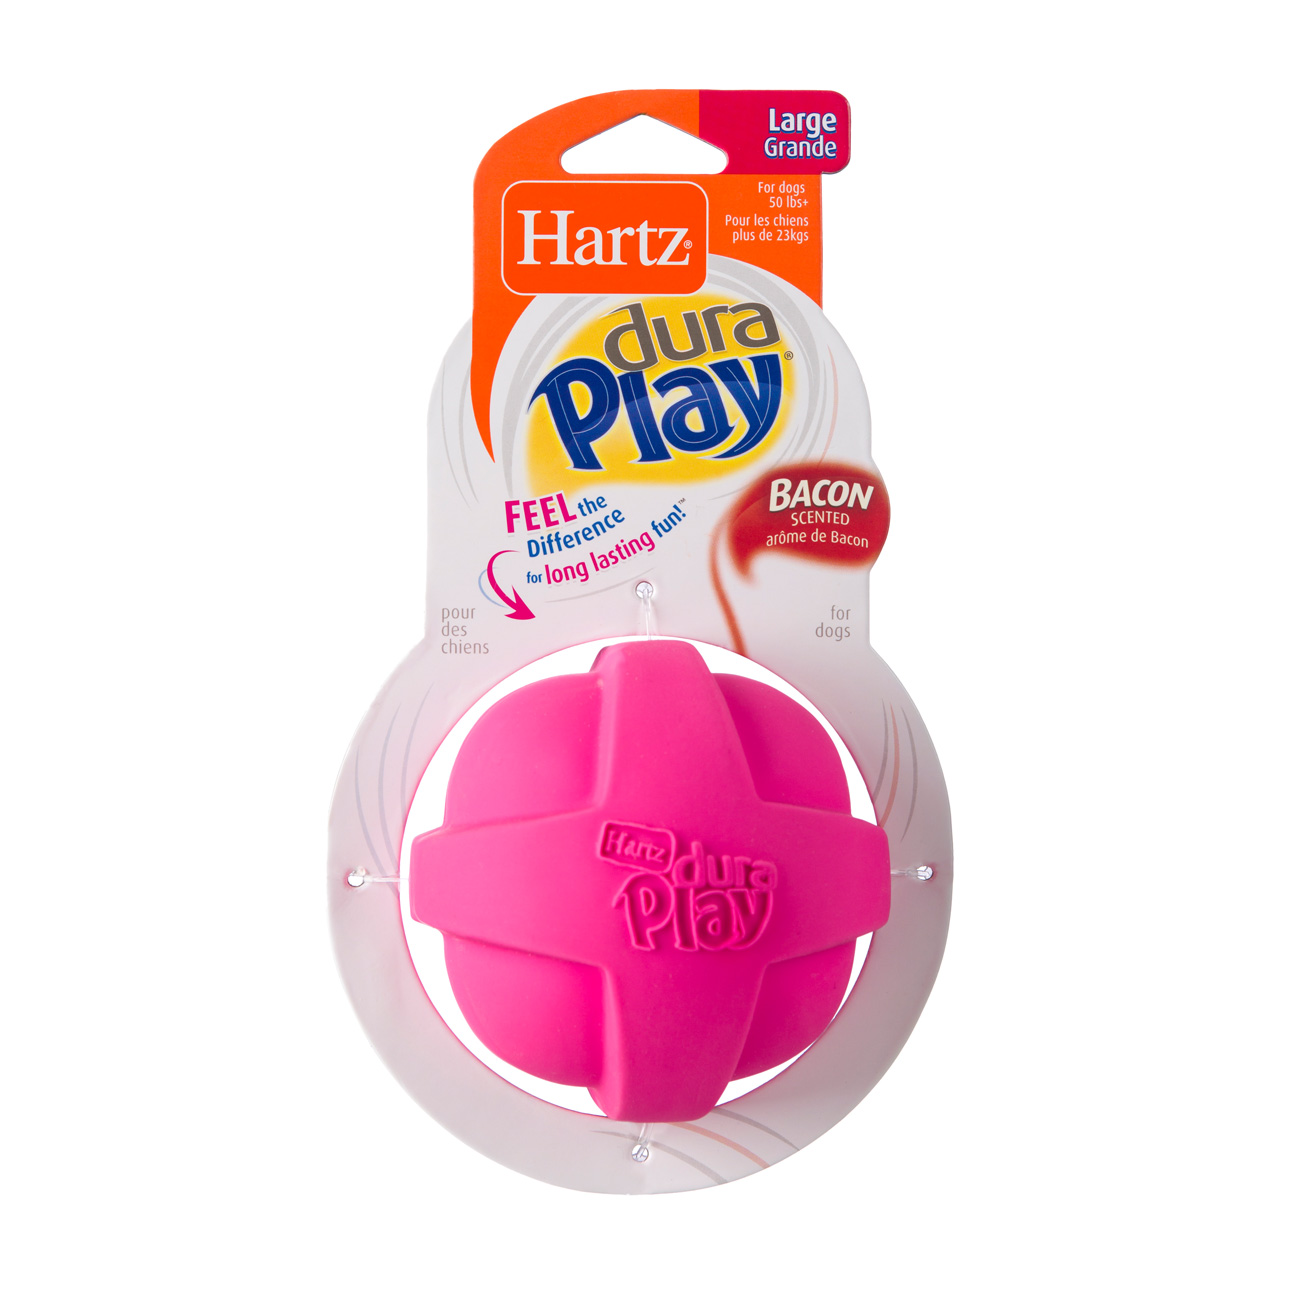 hartz dura play bacon scented dog toy